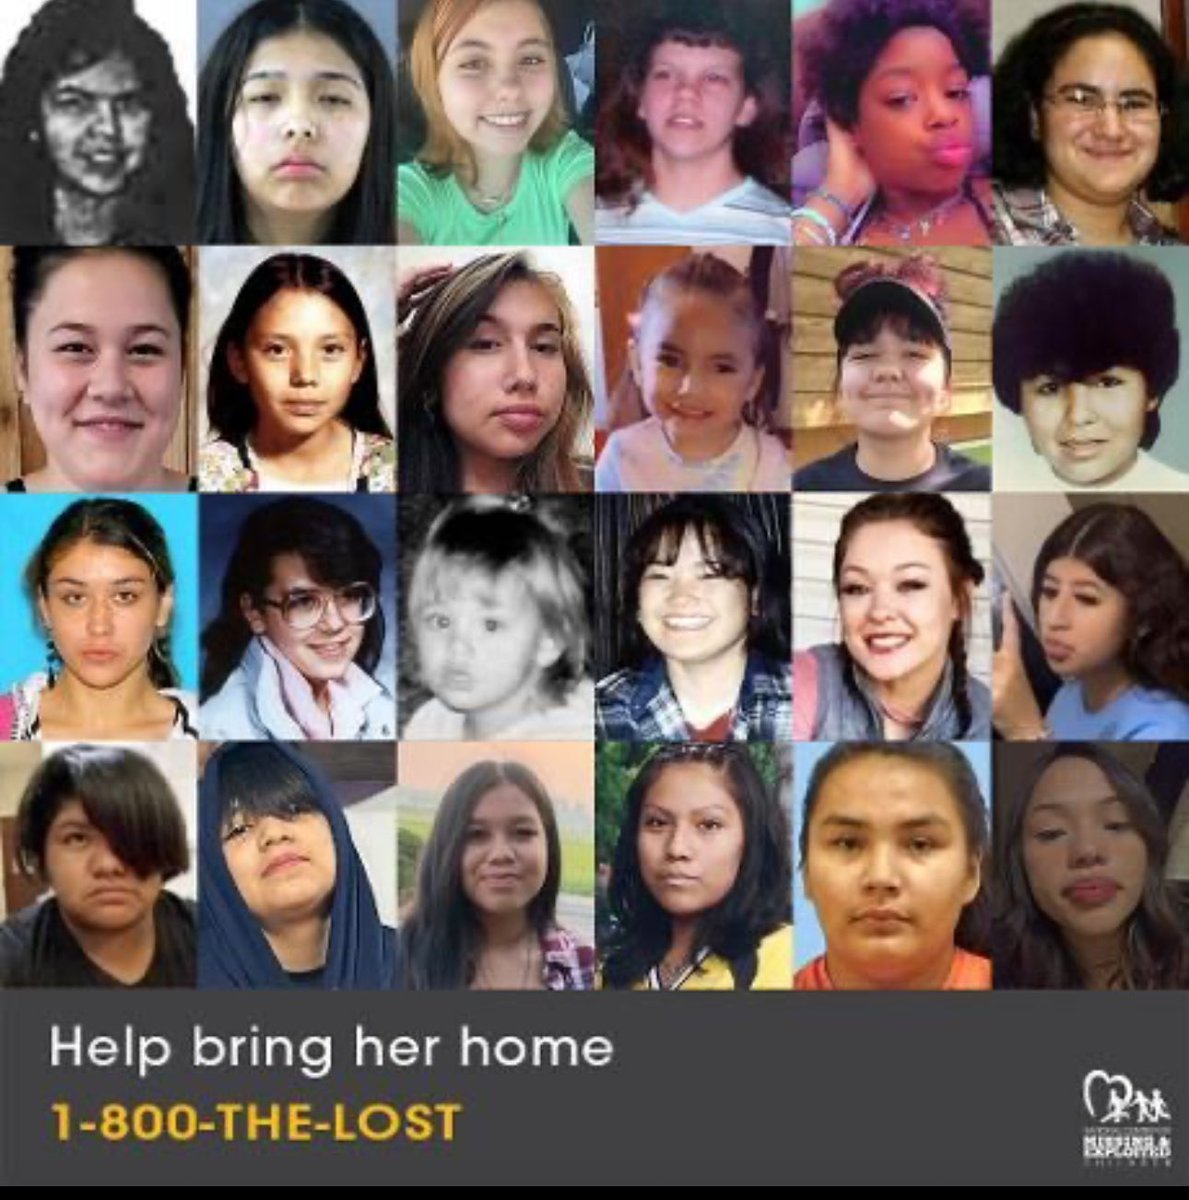 Today is a day of remembrance for Missing and Murdered Indigenous Women and Girls – we hope you will look at the faces of these #missing Indigenous girls to help in our search. You can help bring these children home. #MMIWG lnkd.in/es5uqTyn